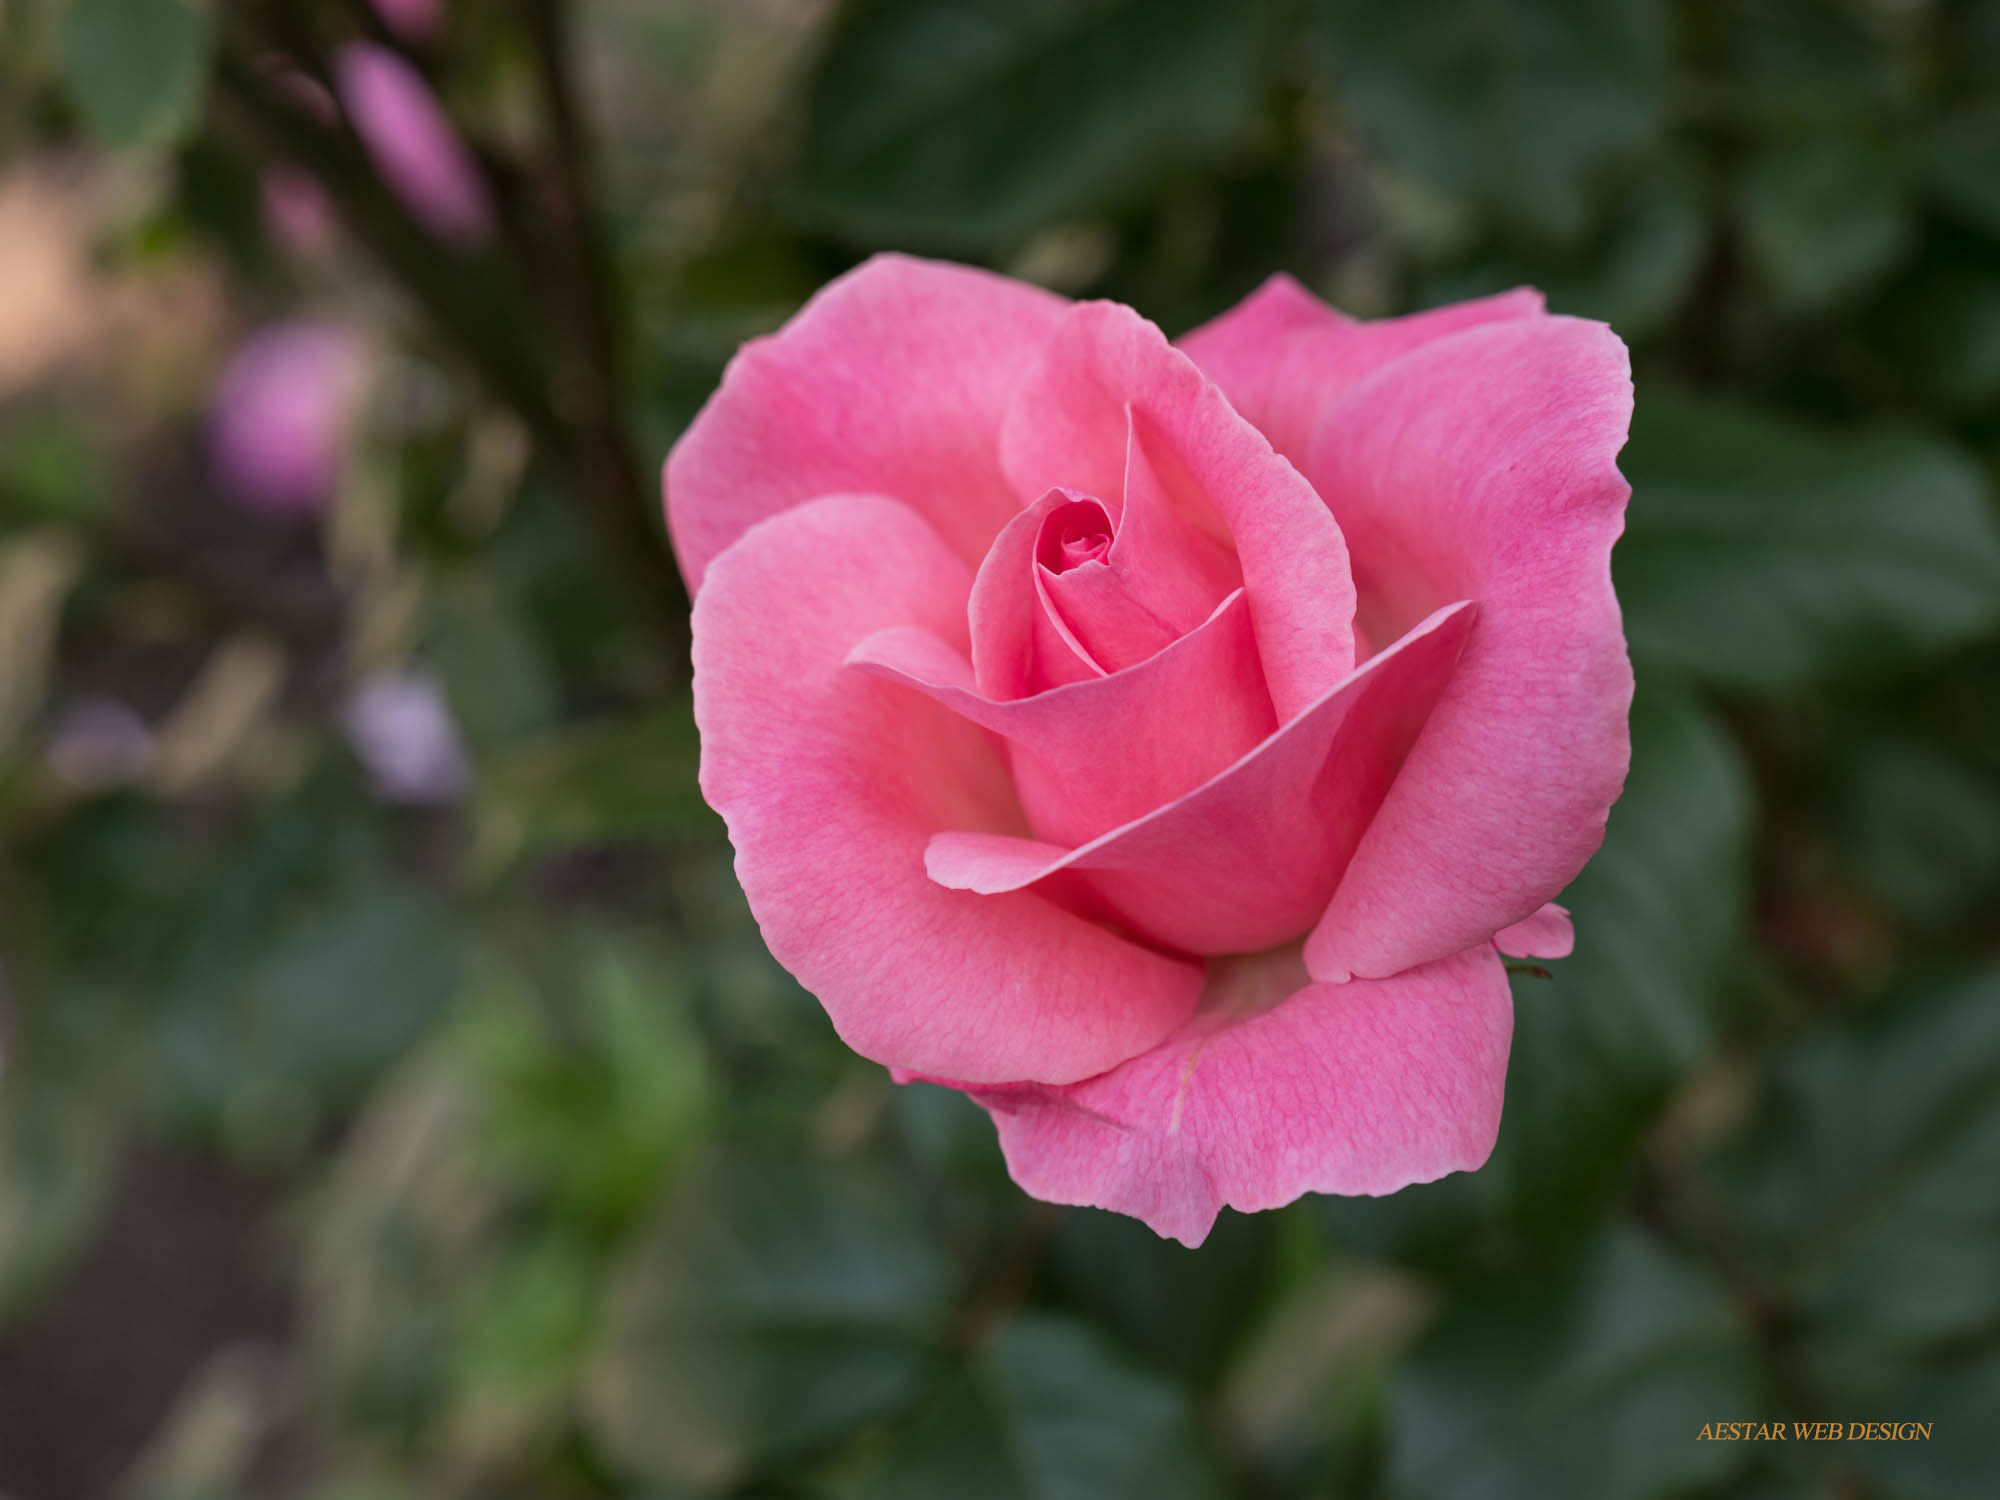 Web Product Photography, Flowers, Rose, New York City